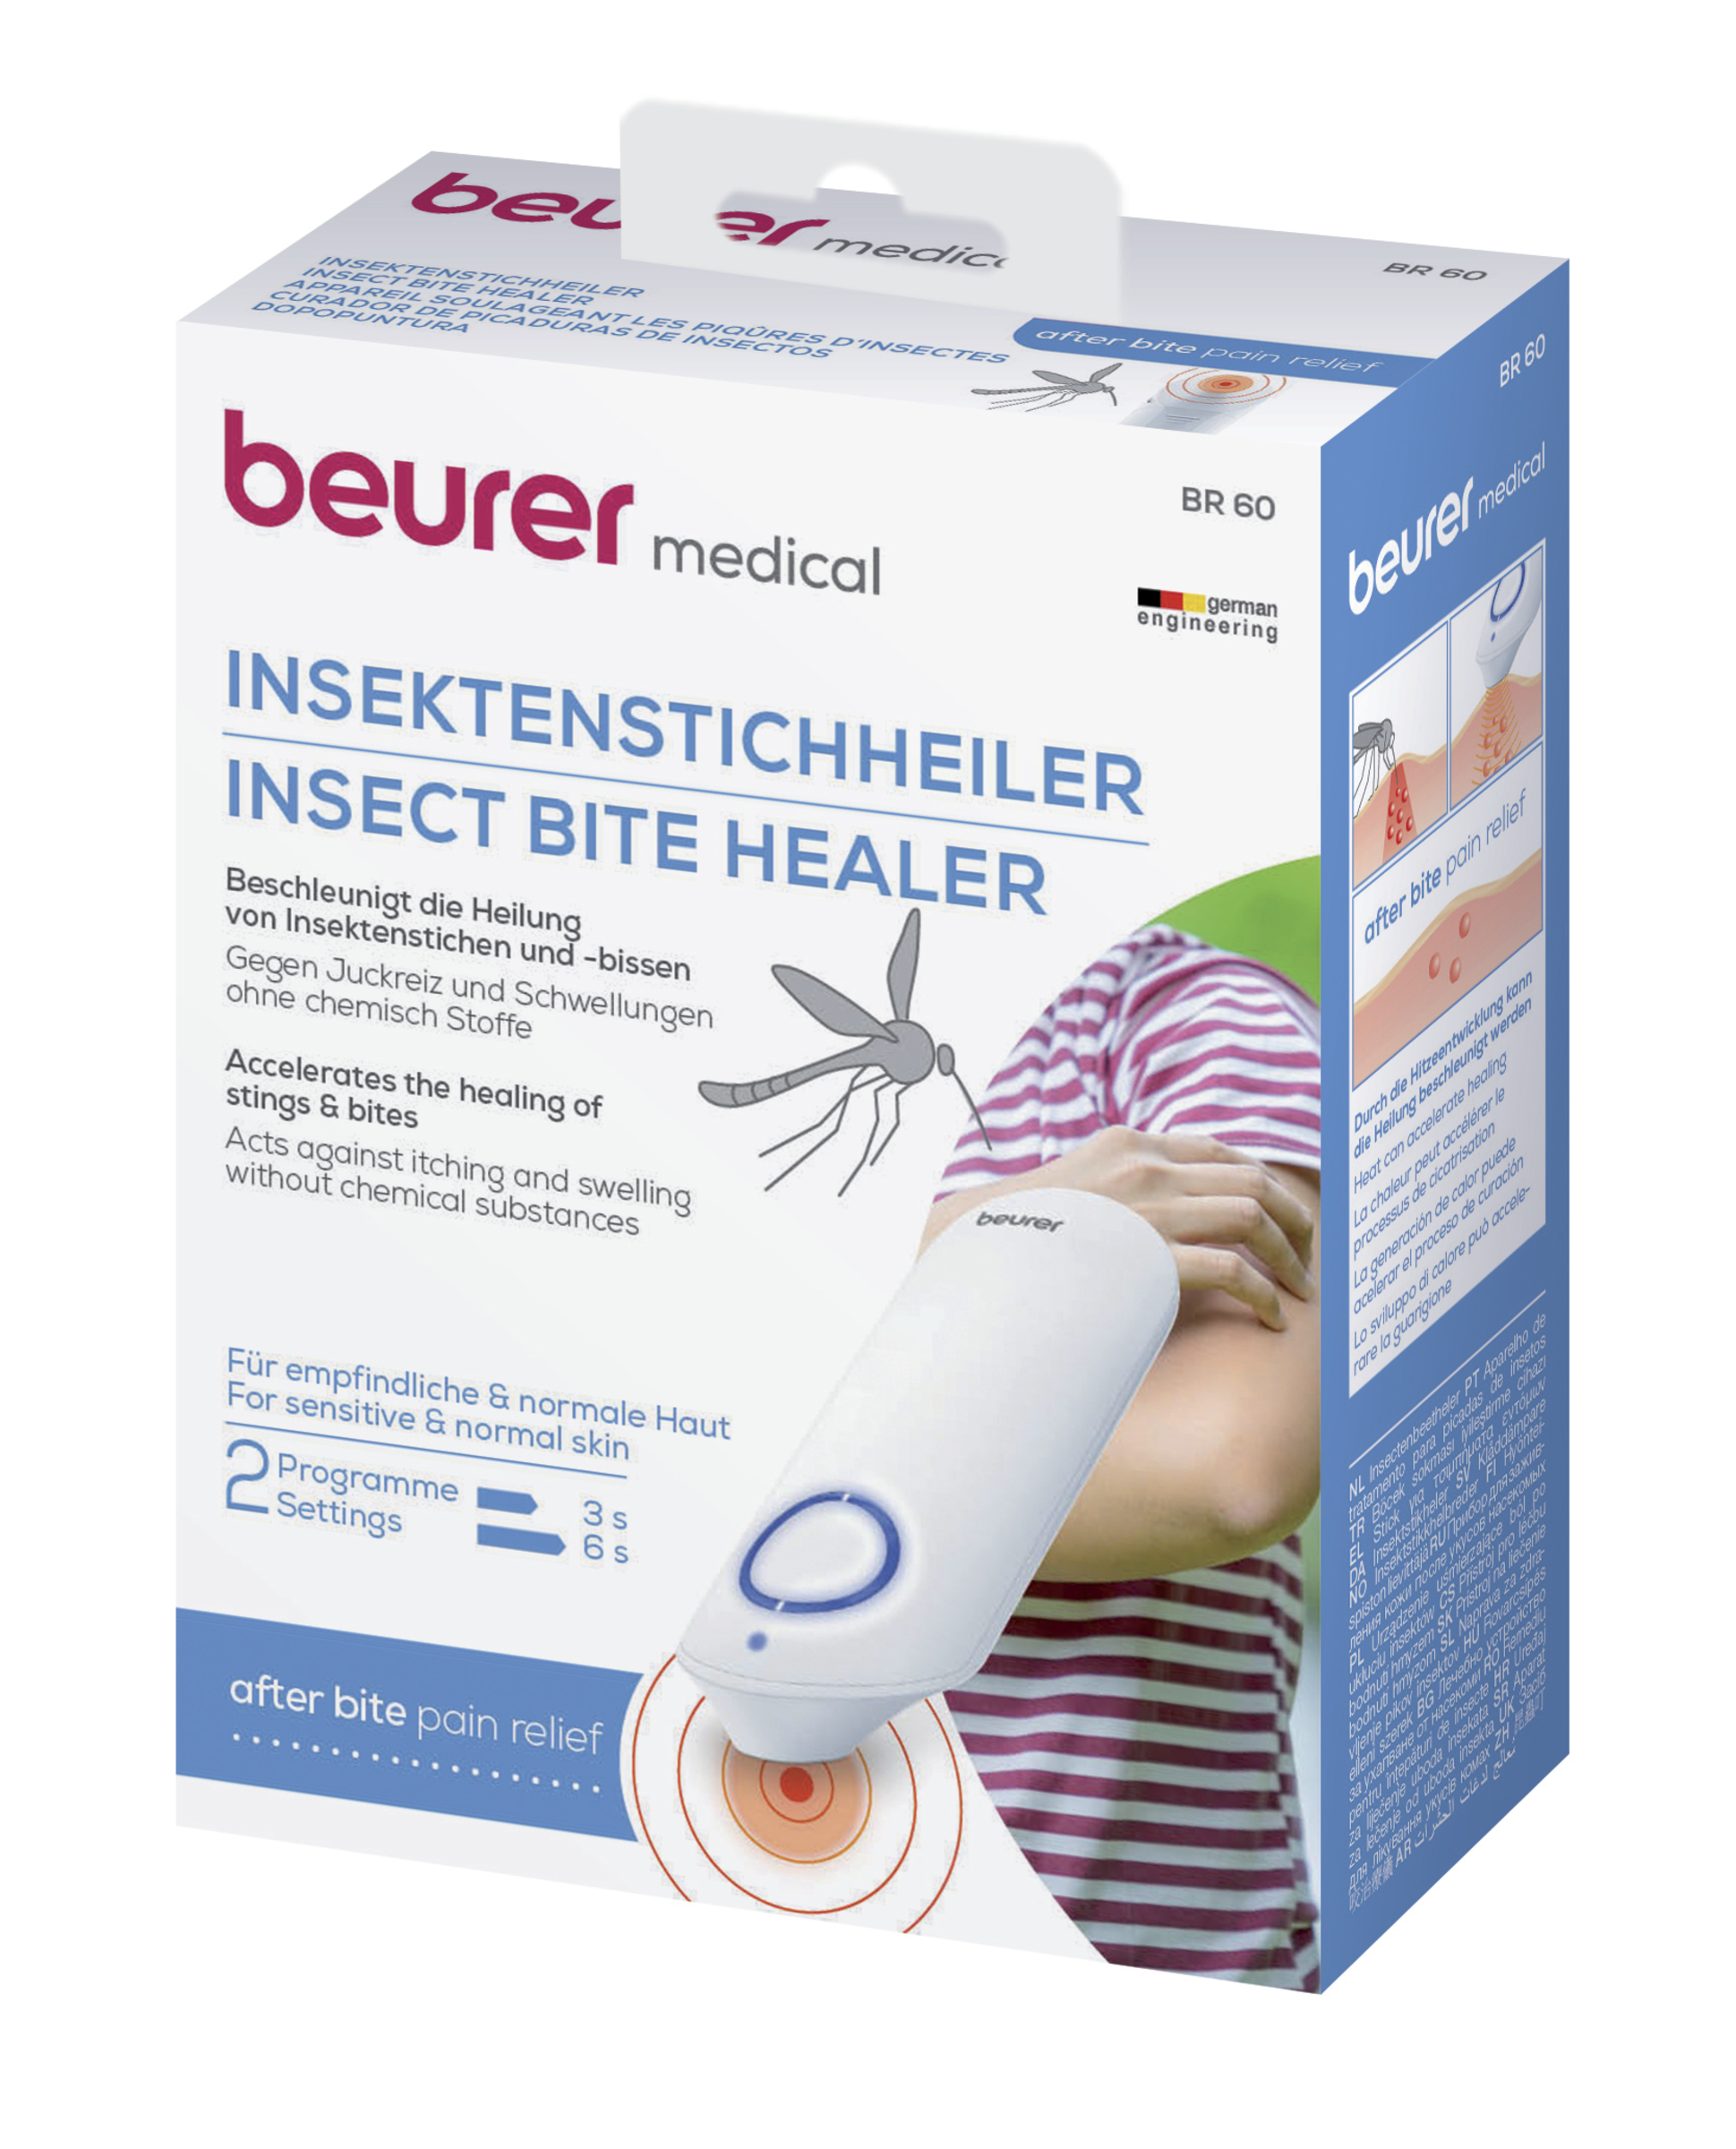 BR 60 insect stitch healers